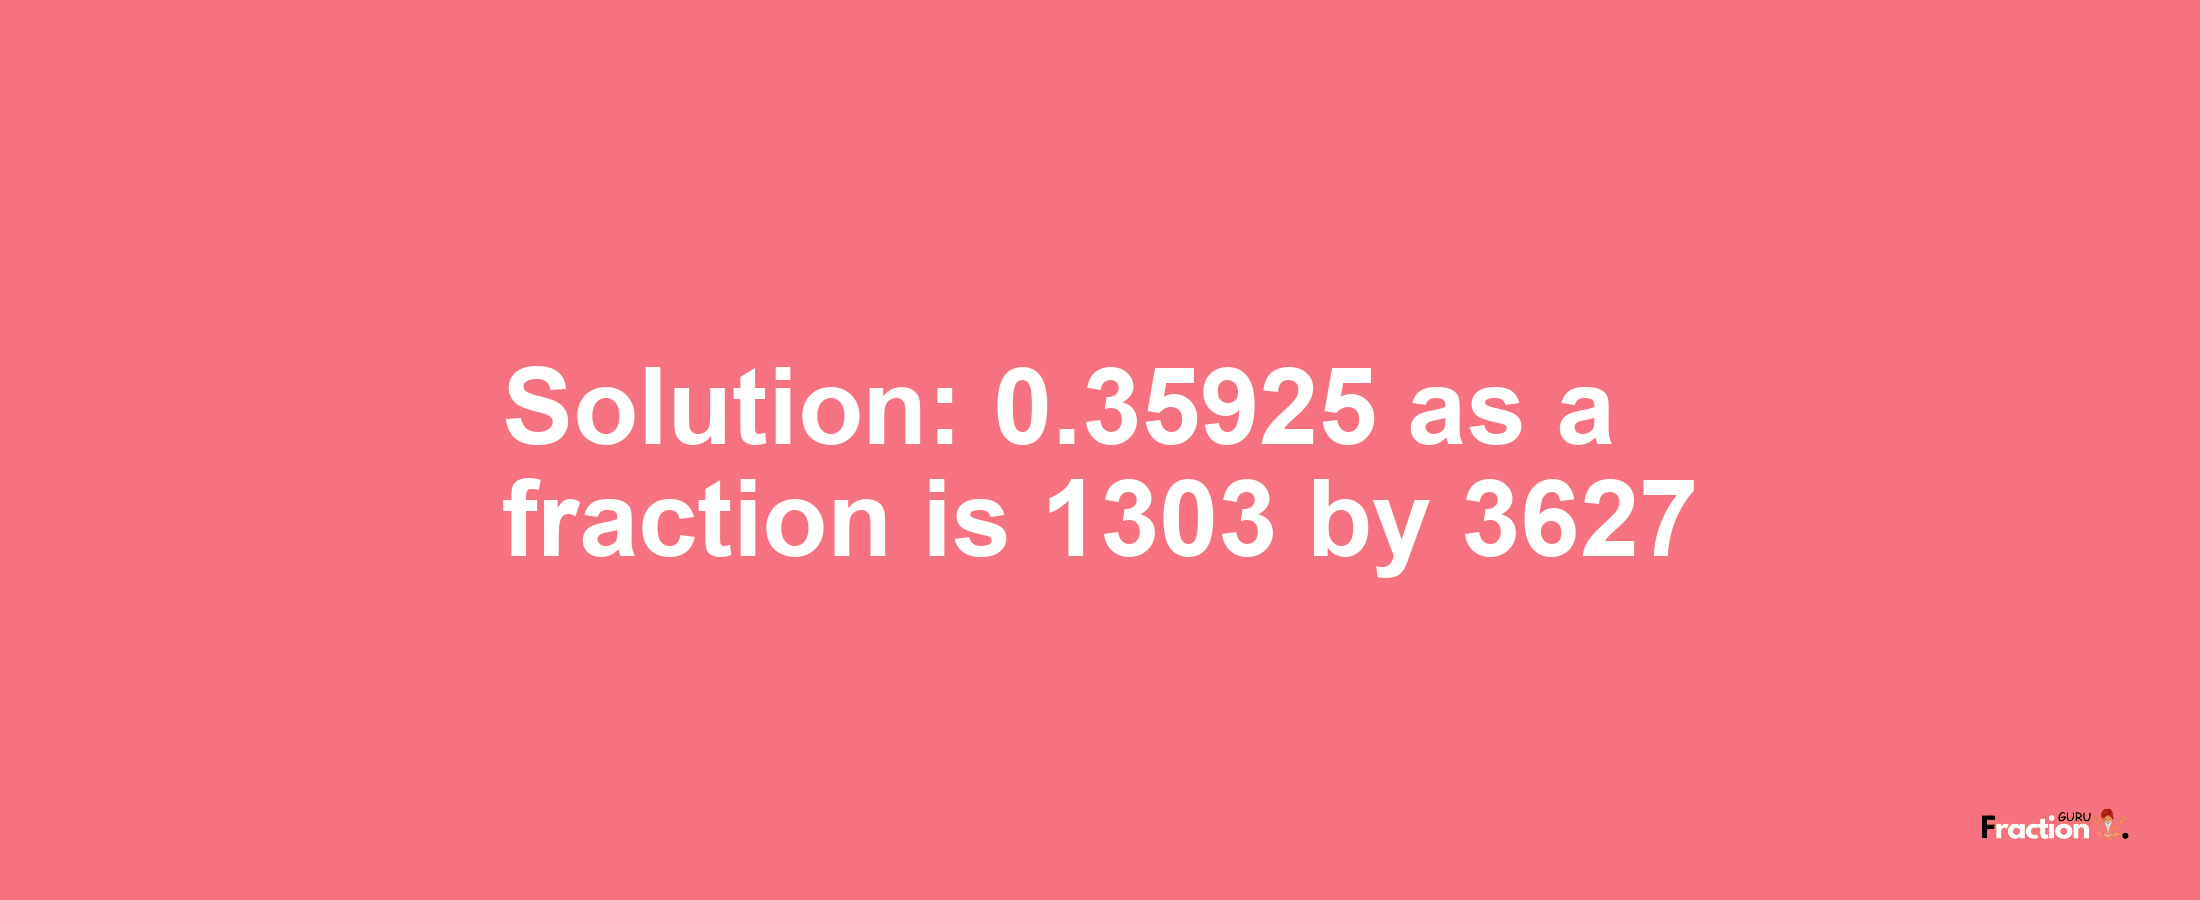 Solution:0.35925 as a fraction is 1303/3627